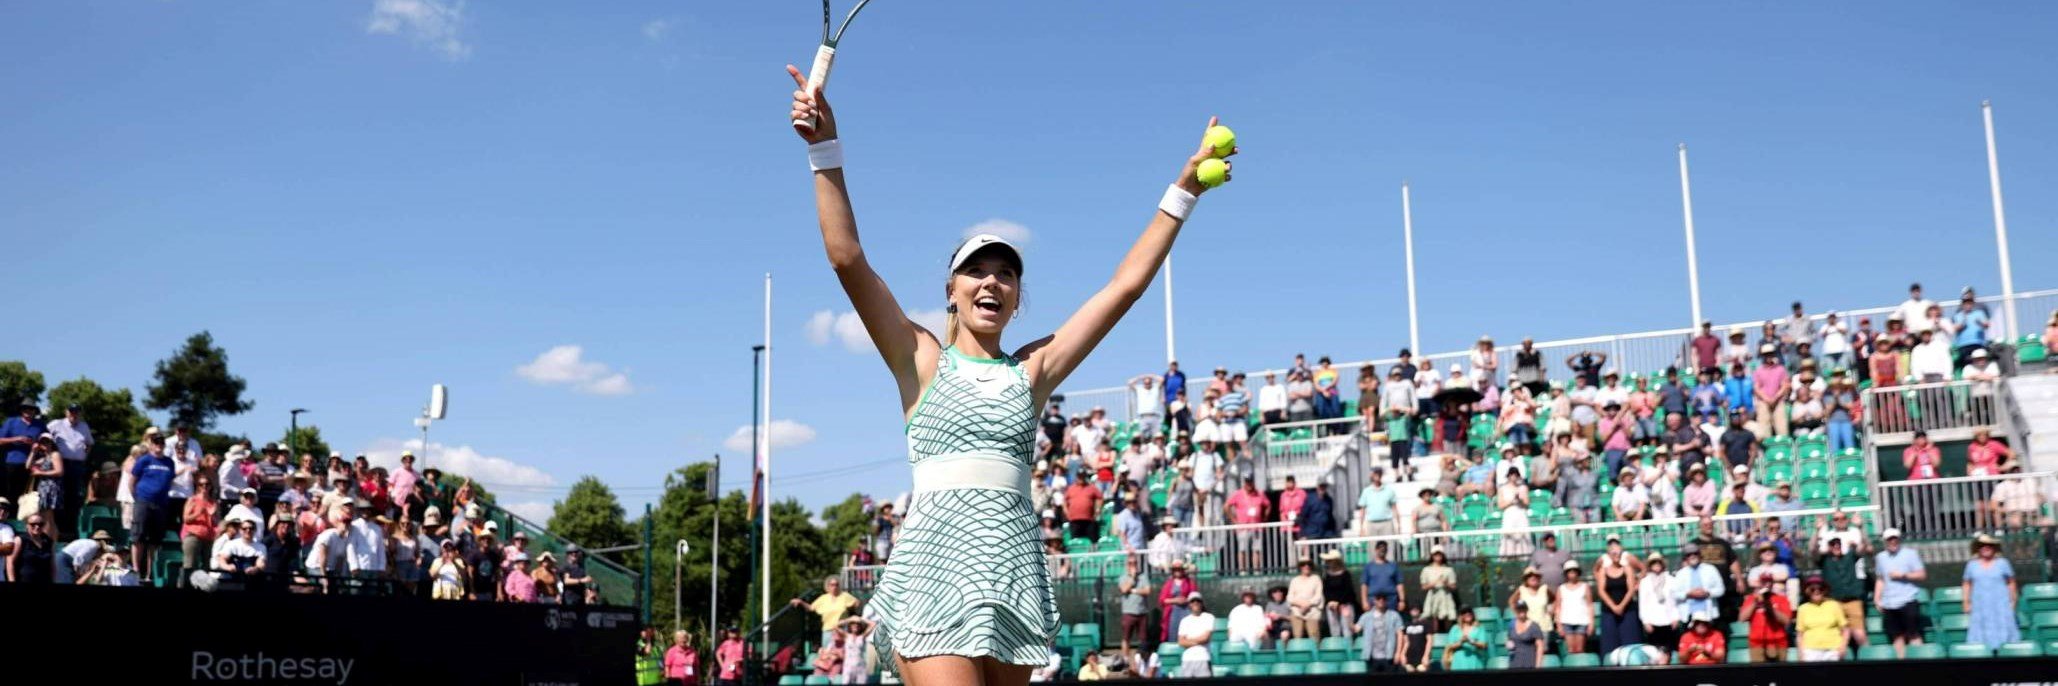 Katie Boulter celebrates reaching her first Rothesay Open Nottingham semi-final